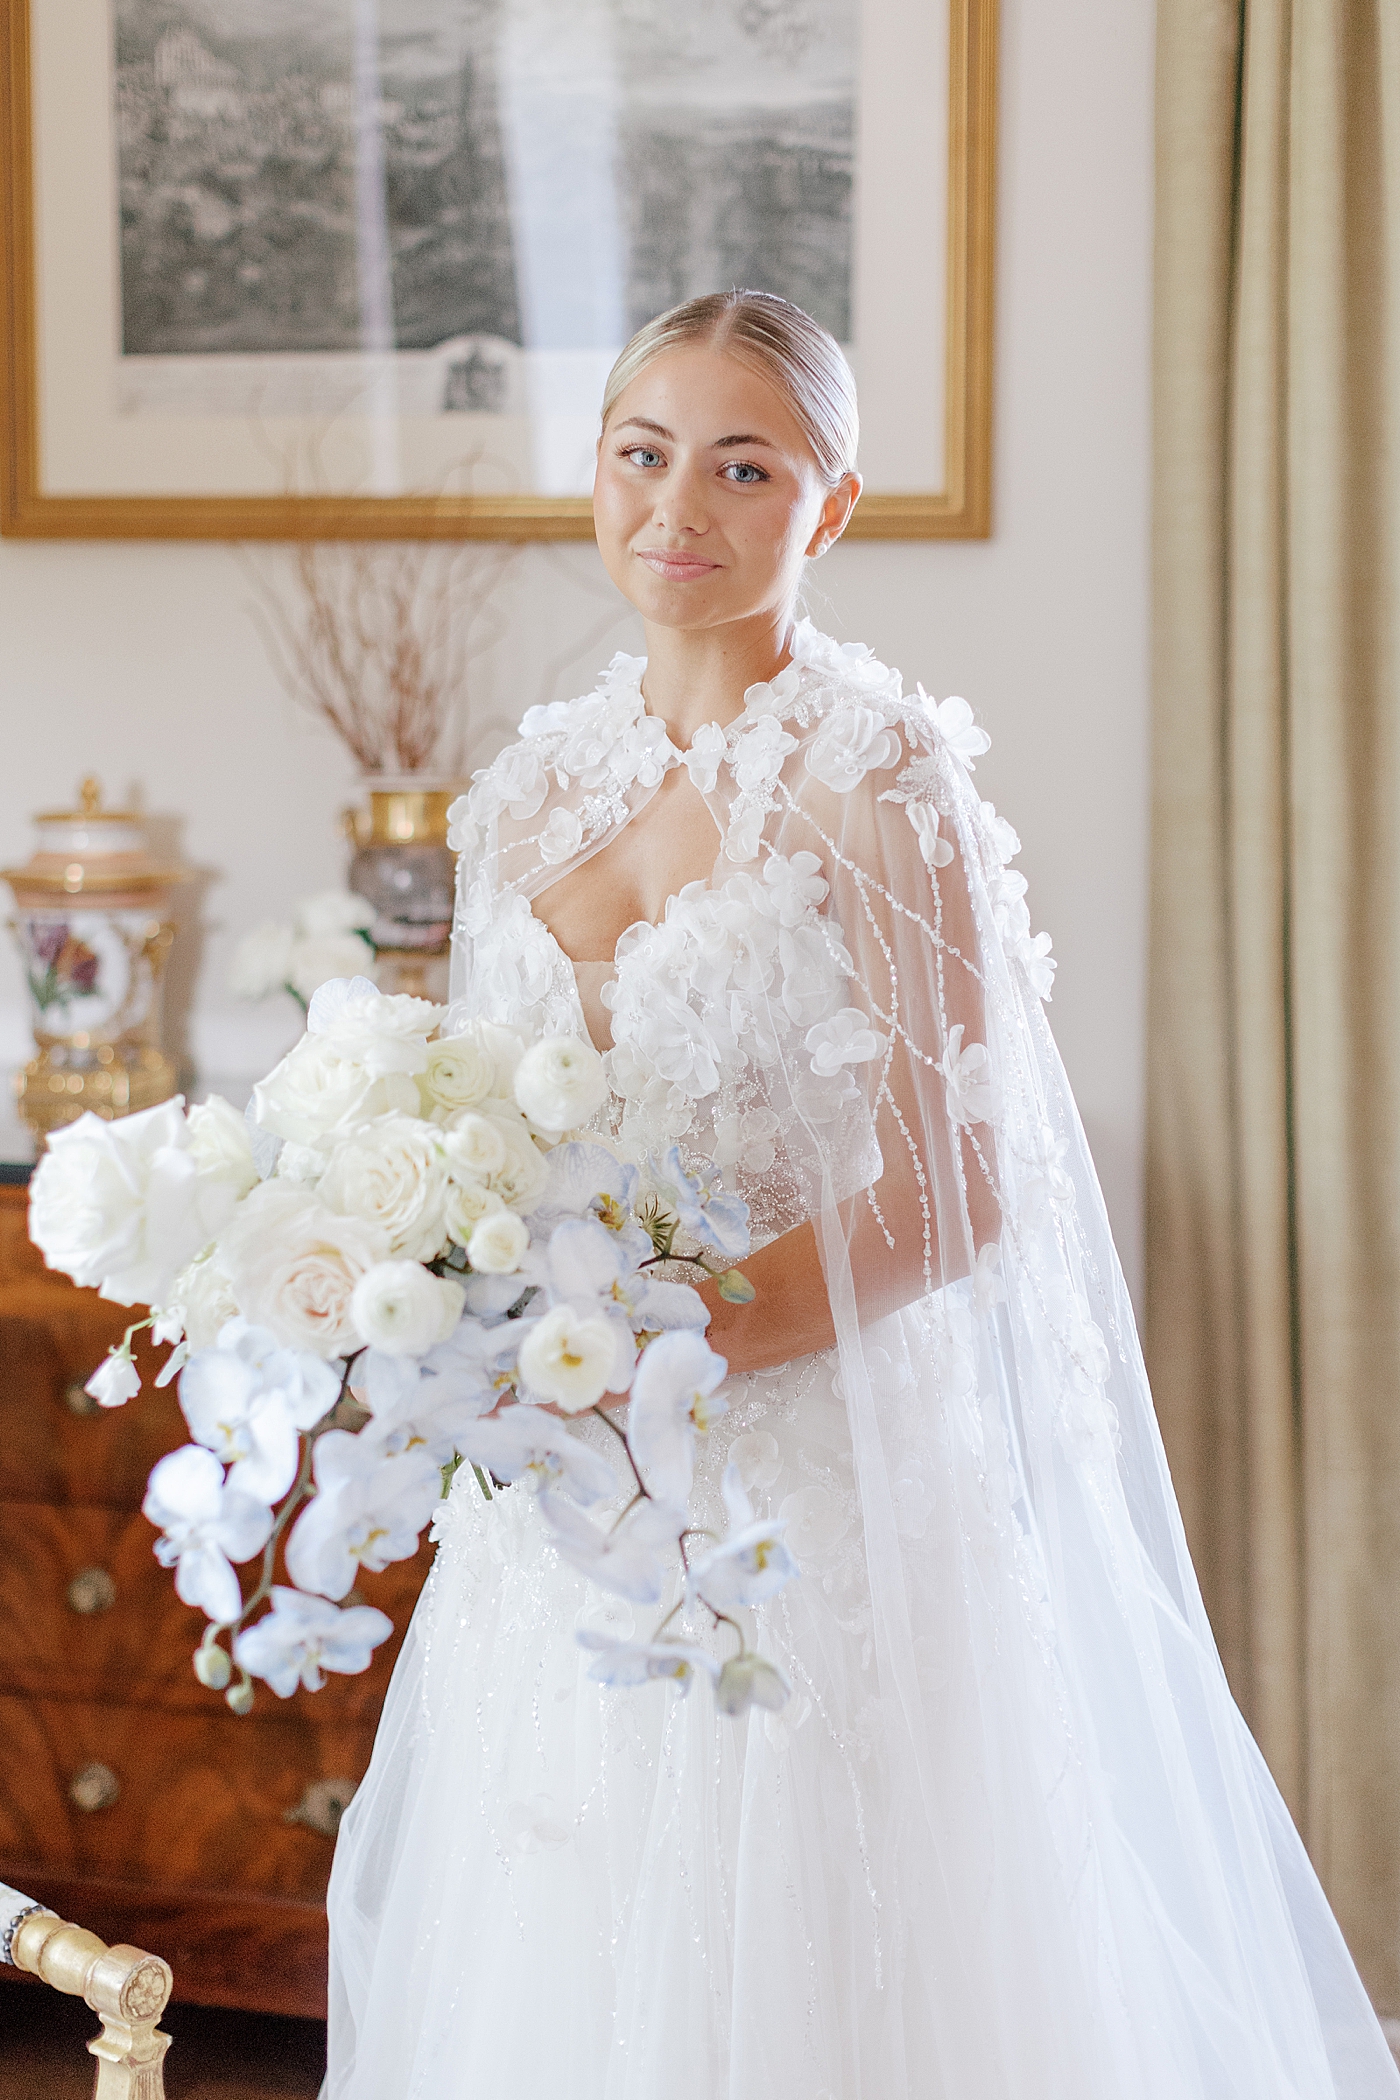 Bride with bouquet and cape smiling | Image by Hope Helmuth Photography